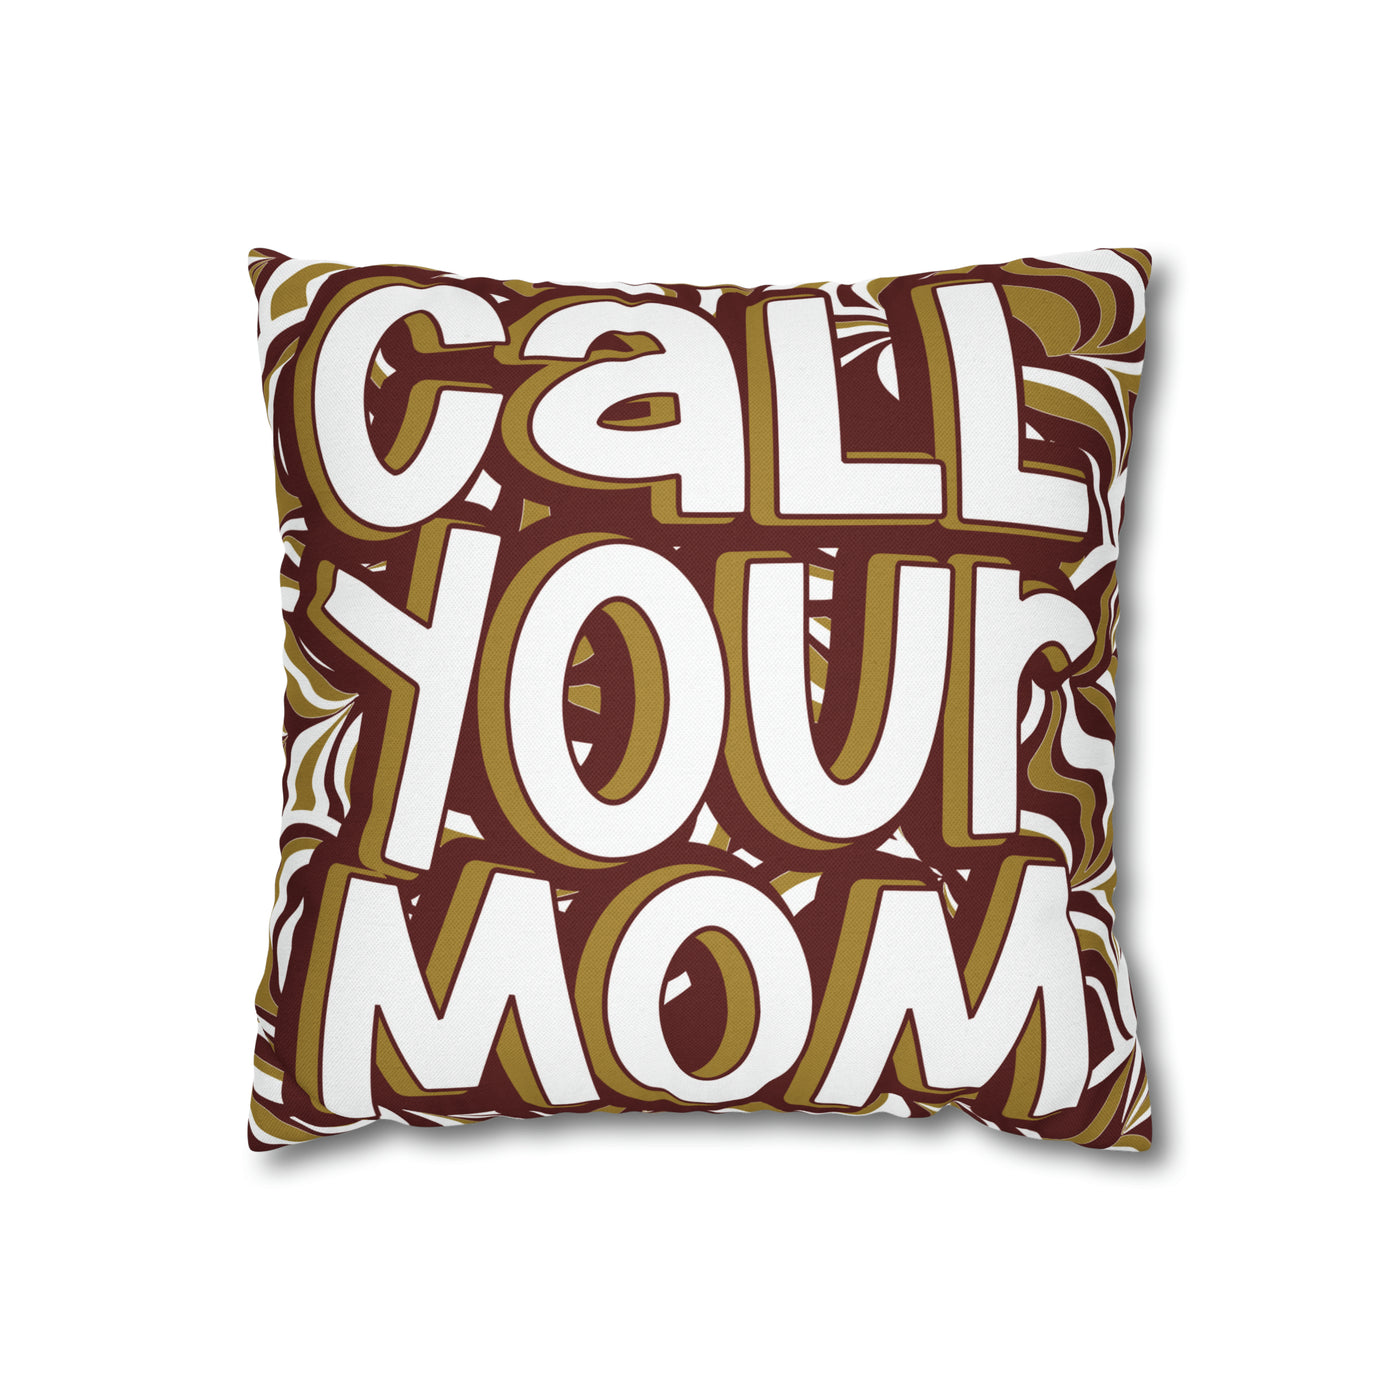 Call Your Mom Make Good Choices - College of Charleston